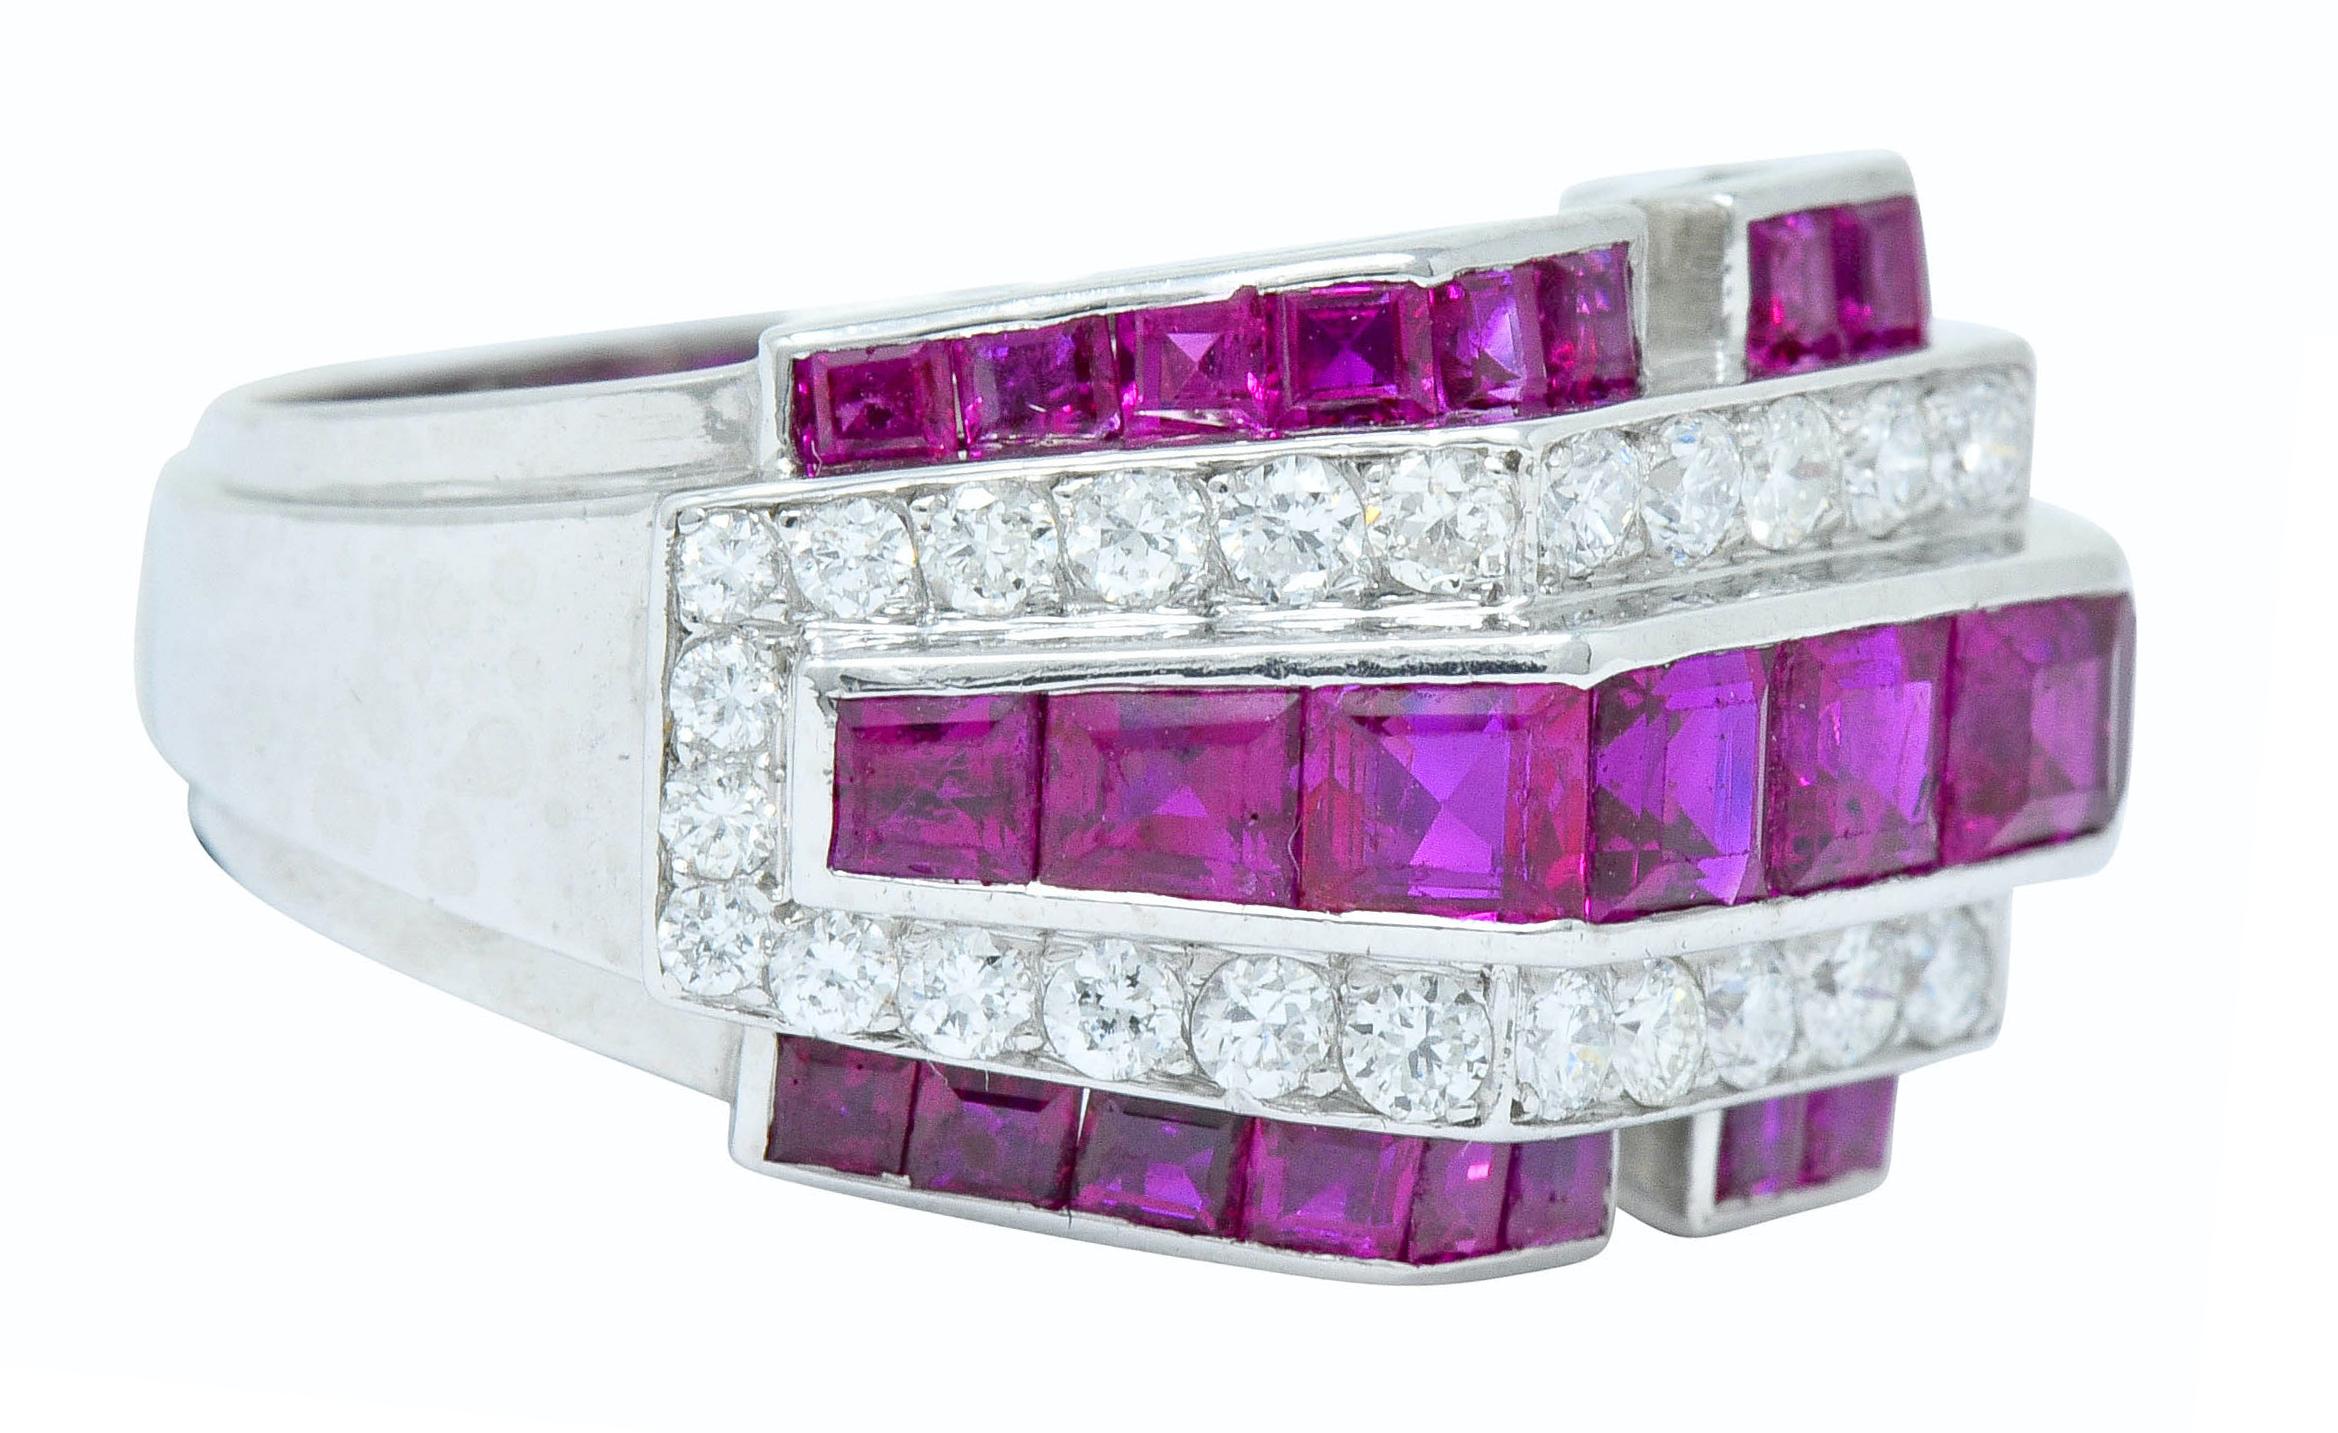 Band ring is designed as stepped horizontal rows of rubies alternating with rows of diamonds

Rubies are channel set and a well-matched purplish-red color, weighing approximately 2.20 carat total

Diamonds are bead set and weigh in total